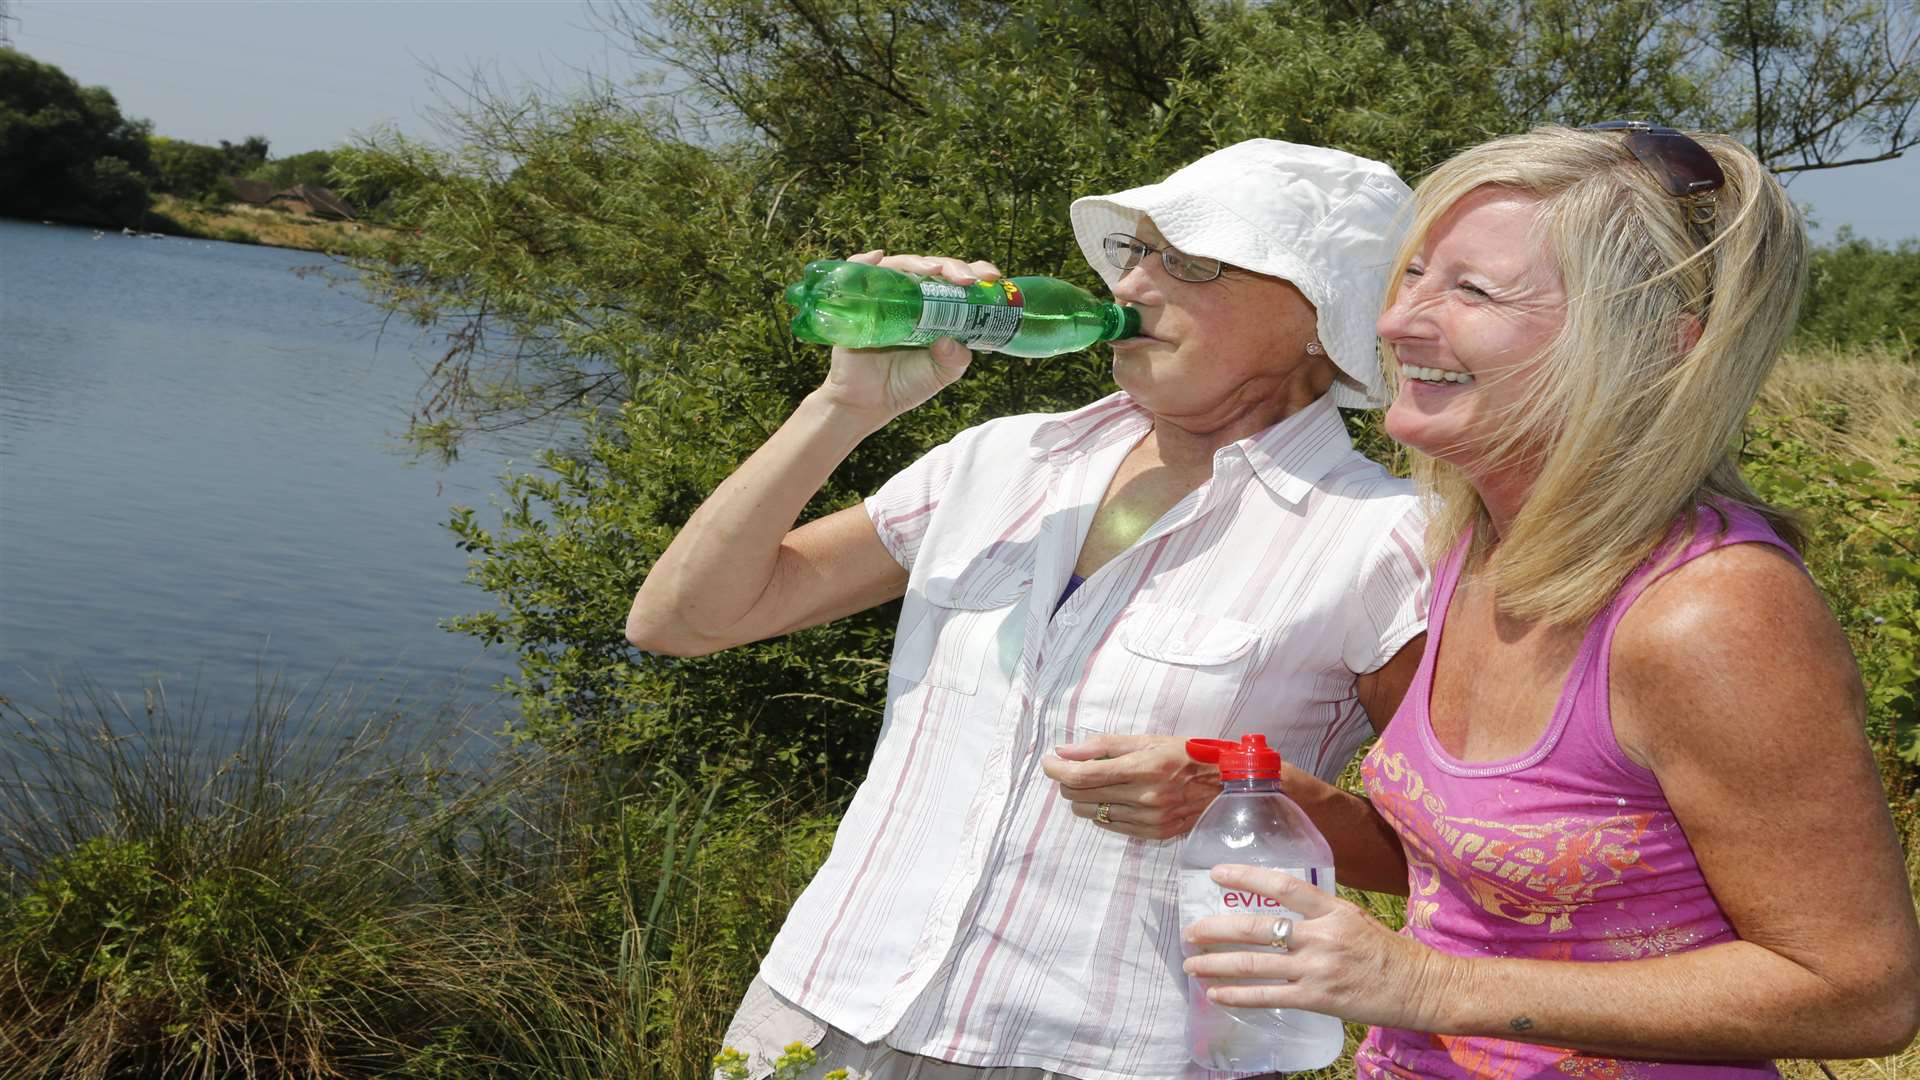 Health bosses have warned people to take care in the sun - and drink plenty of water